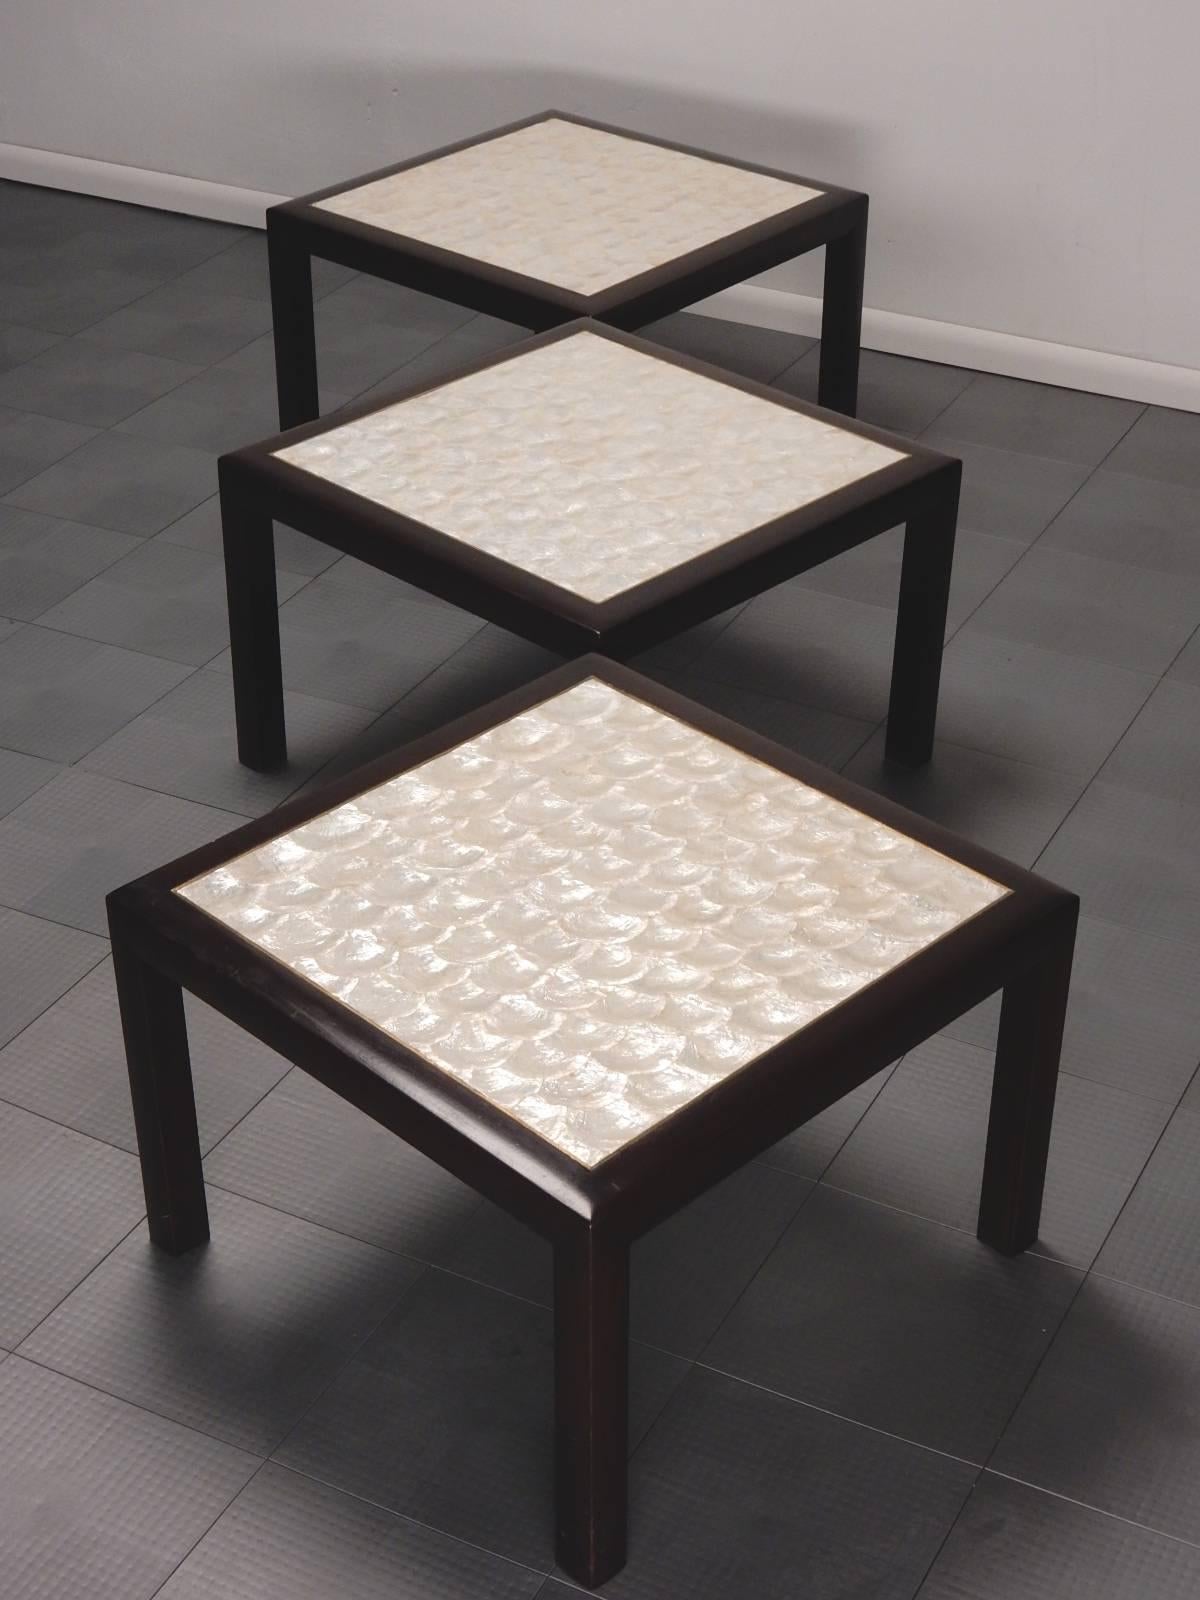 Set of three lacquered mahogany Parsons tables with polished brass top trim and pearly Capiz shell inlay.
Can be used together as a cocktail table or individually.
Extraordinary custom crafted tables, circa 1960s.
These are in excellent